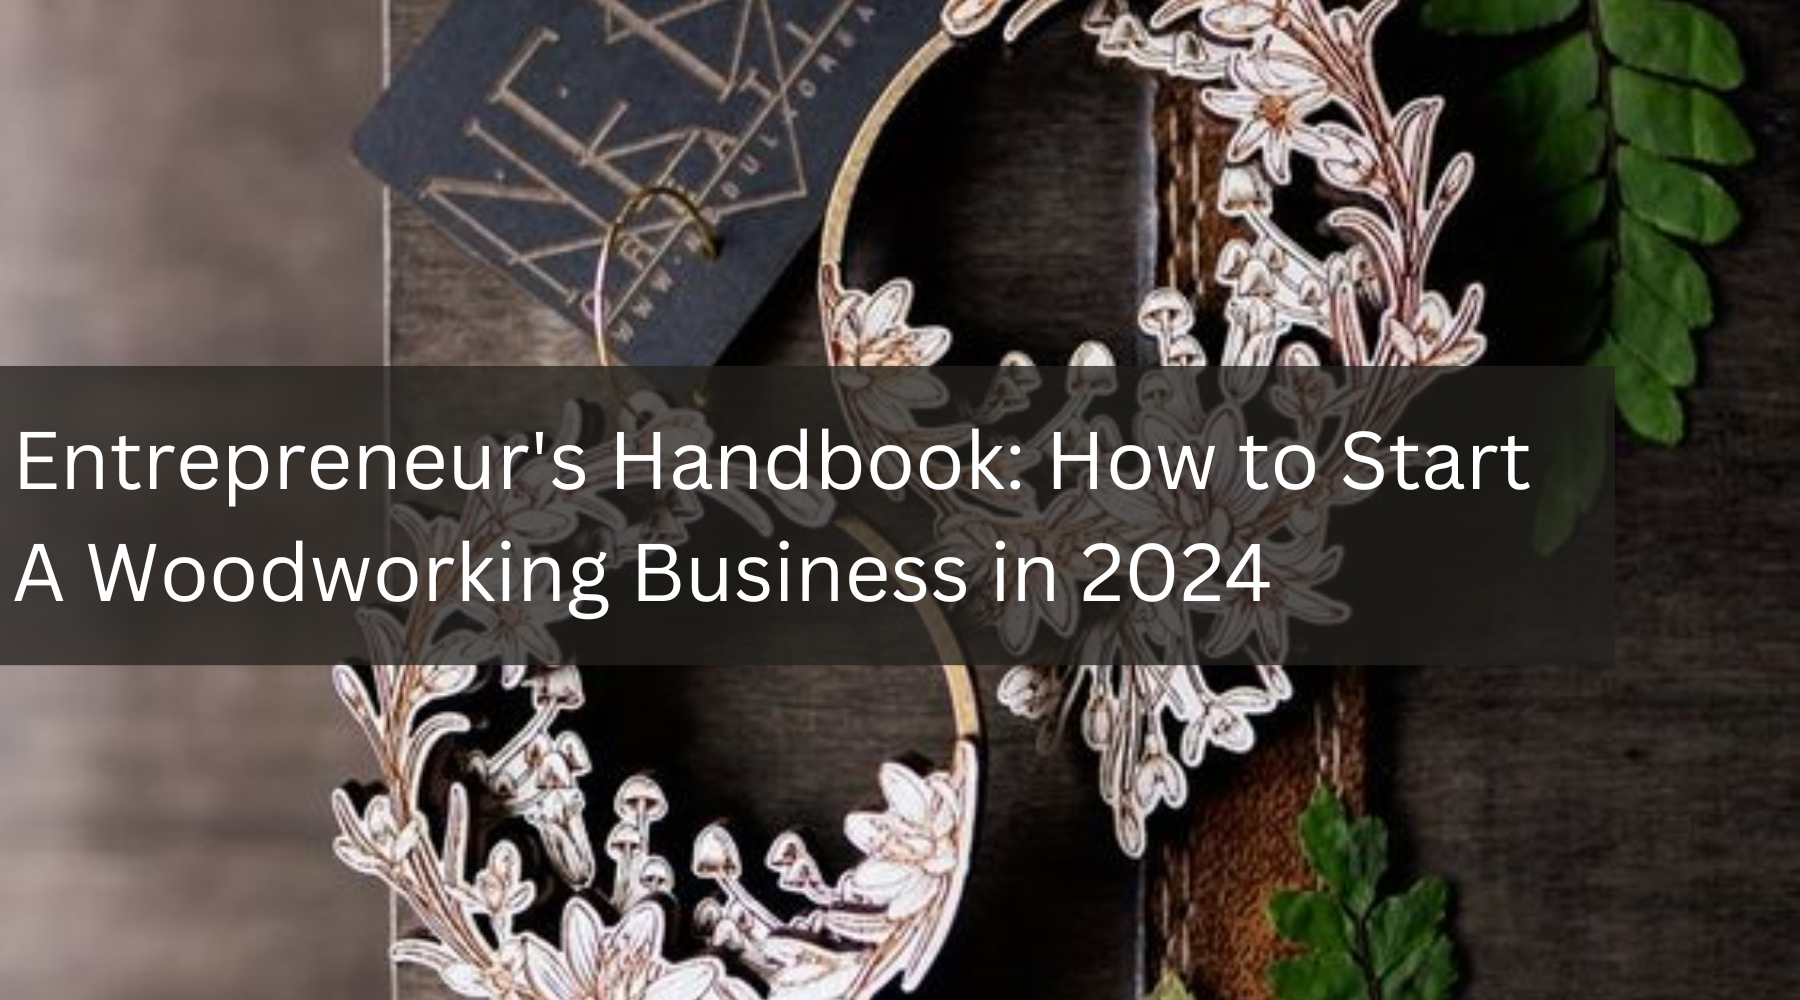 Entrepreneur's Handbook: How to Start A Woodworking Business in 2024